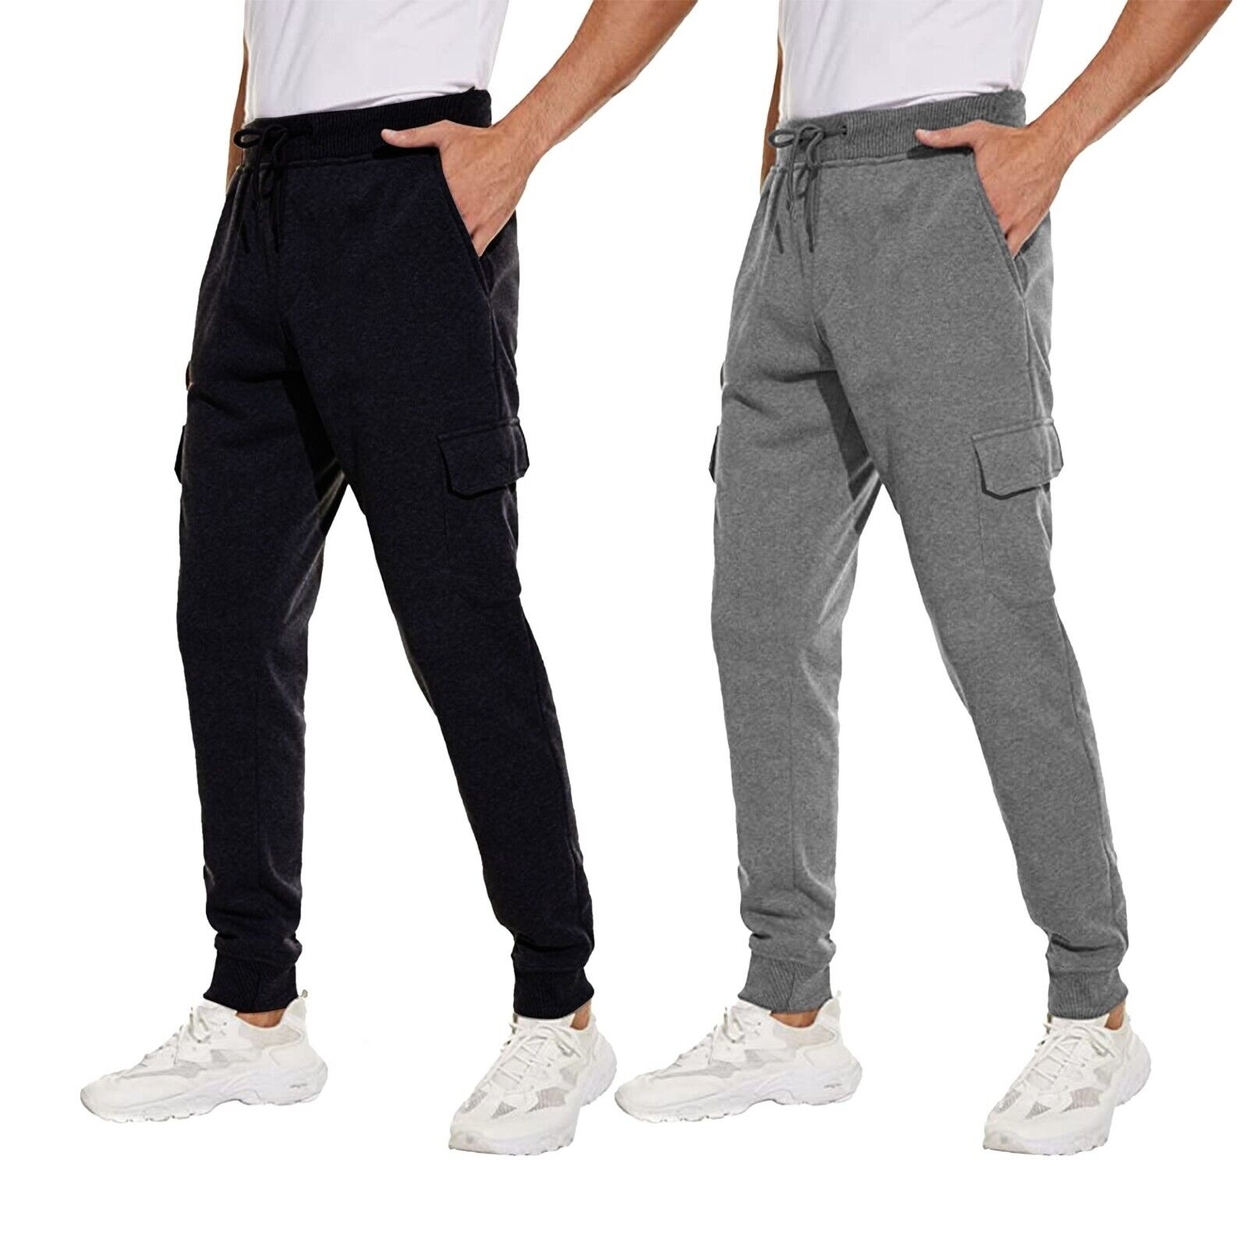 Multi-Pack Men's Ultra Soft Winter Warm Thick Athletic Sherpa Lined Jogger Pants - Assorted, 2, X-large